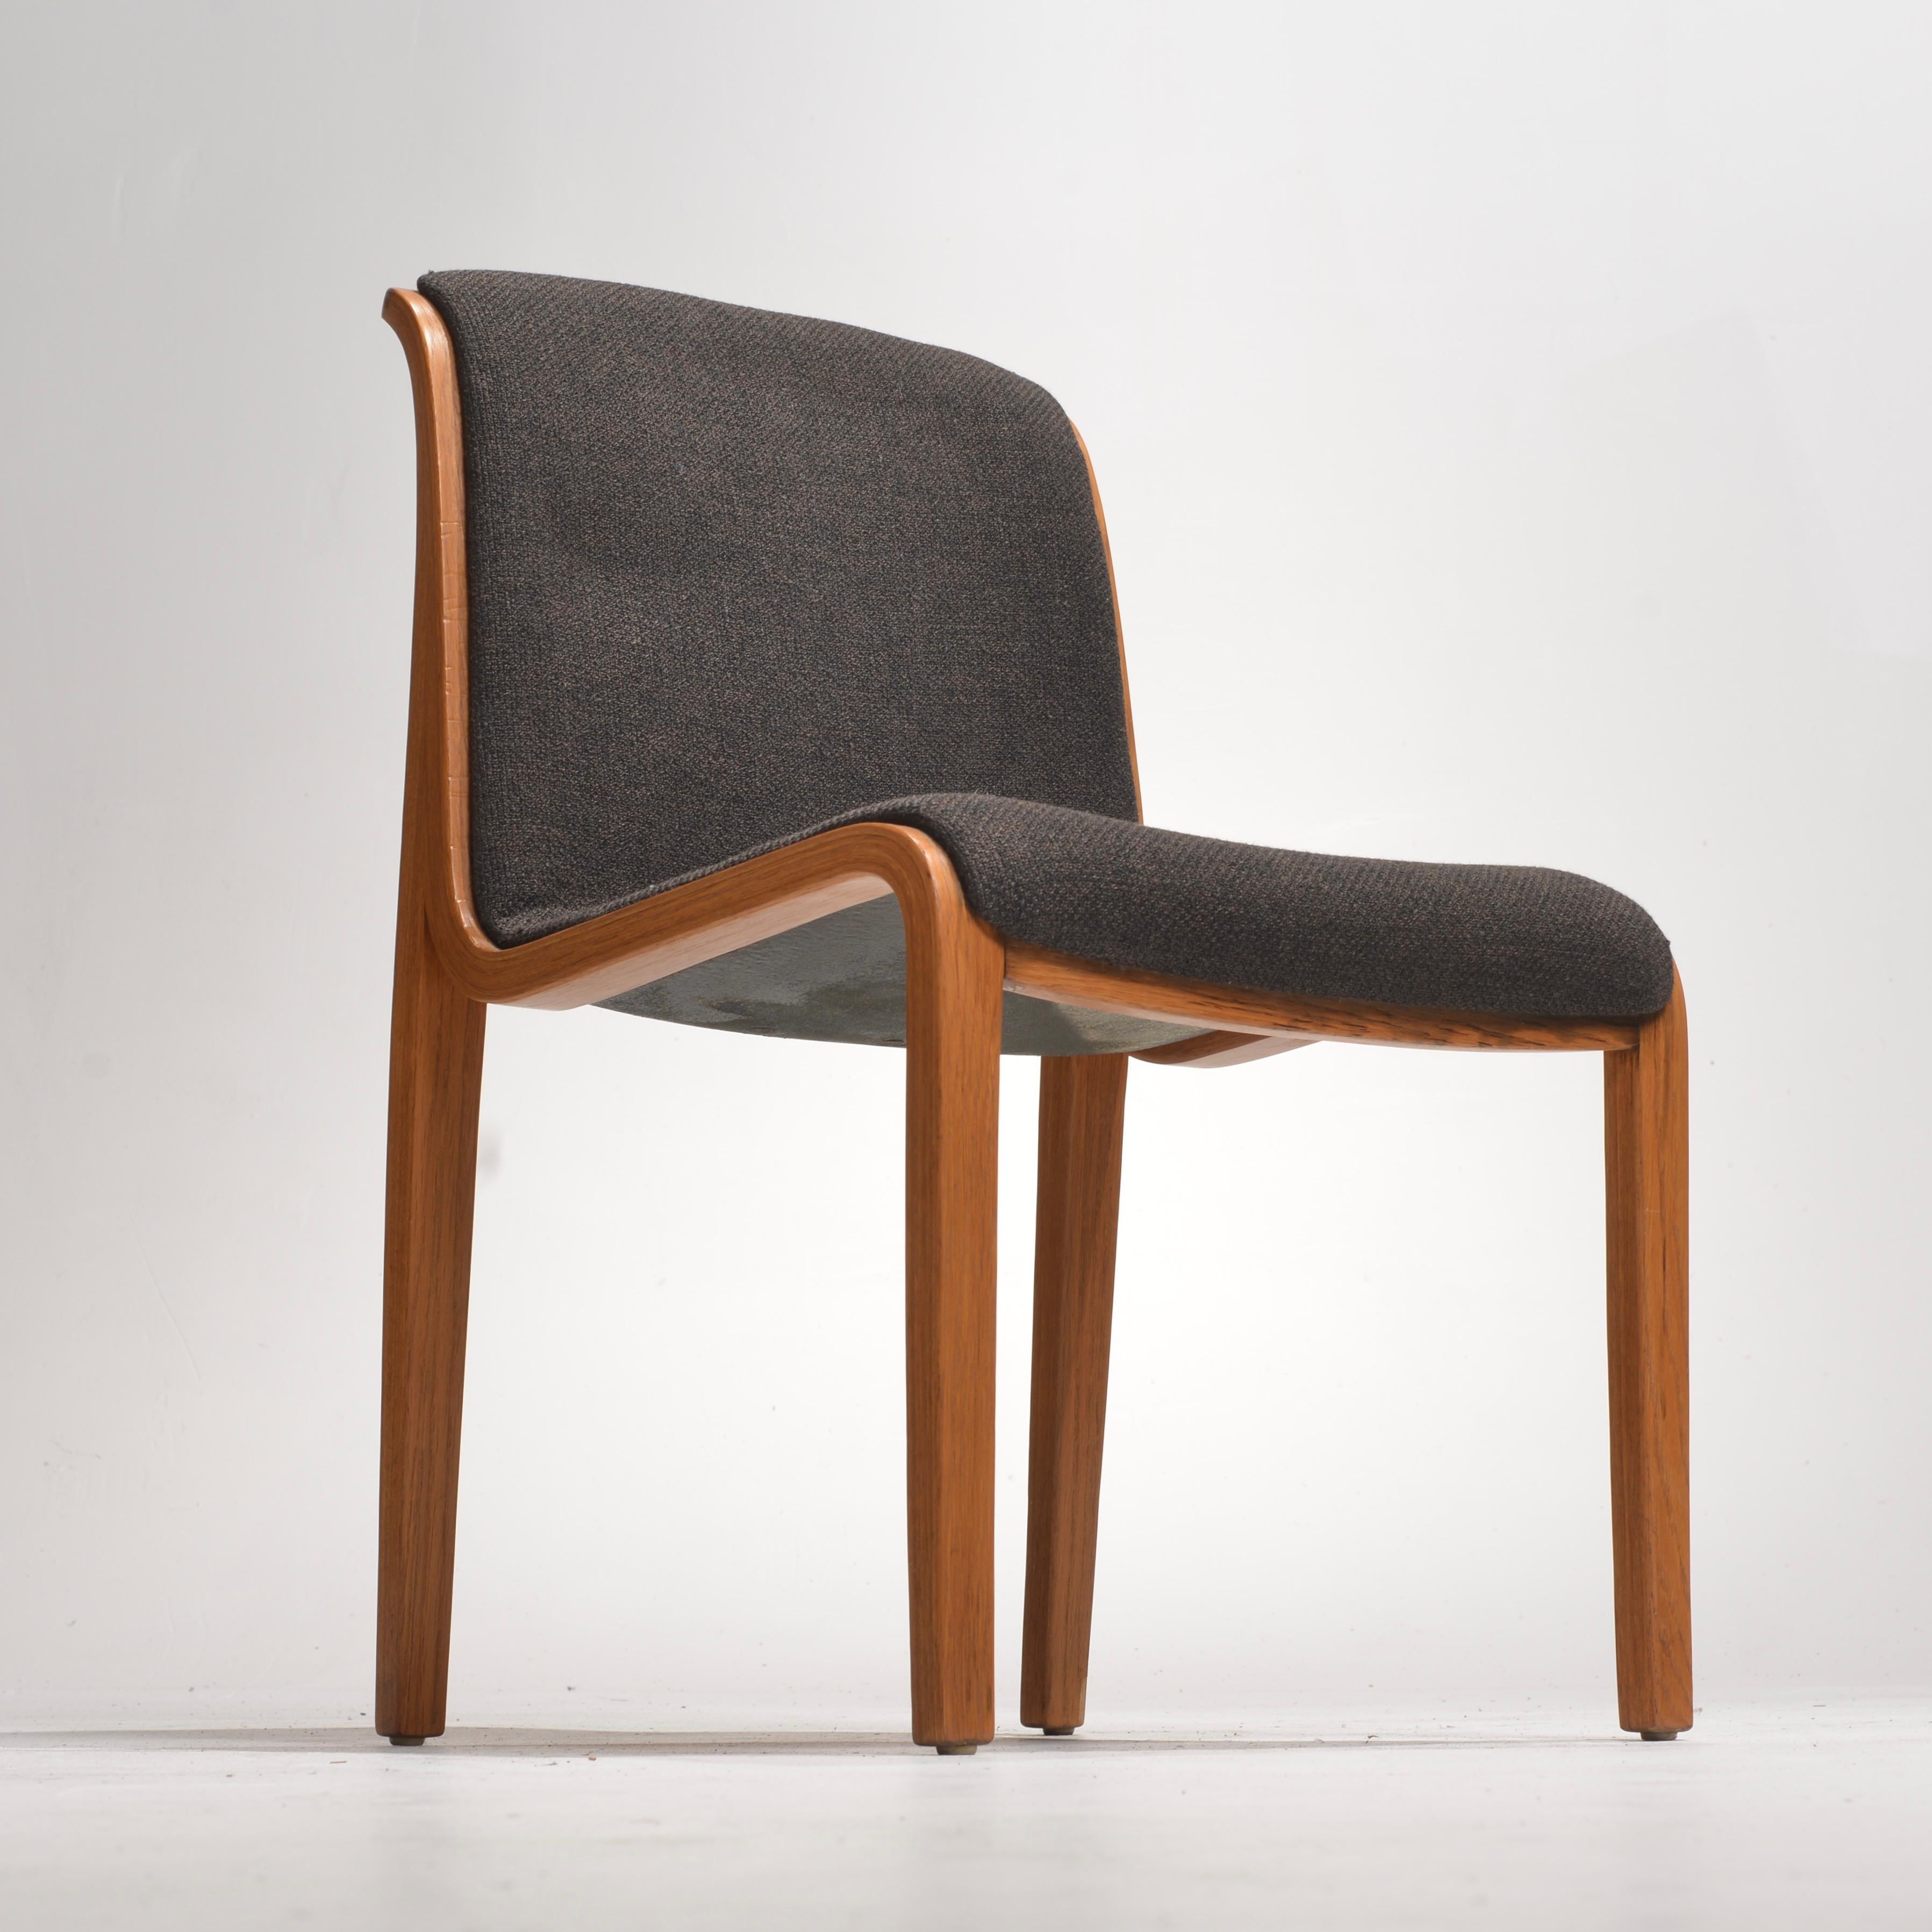 Bent Wood Upholstered Dining Chairs by Bill Stephens for Knoll In Good Condition For Sale In Los Angeles, CA